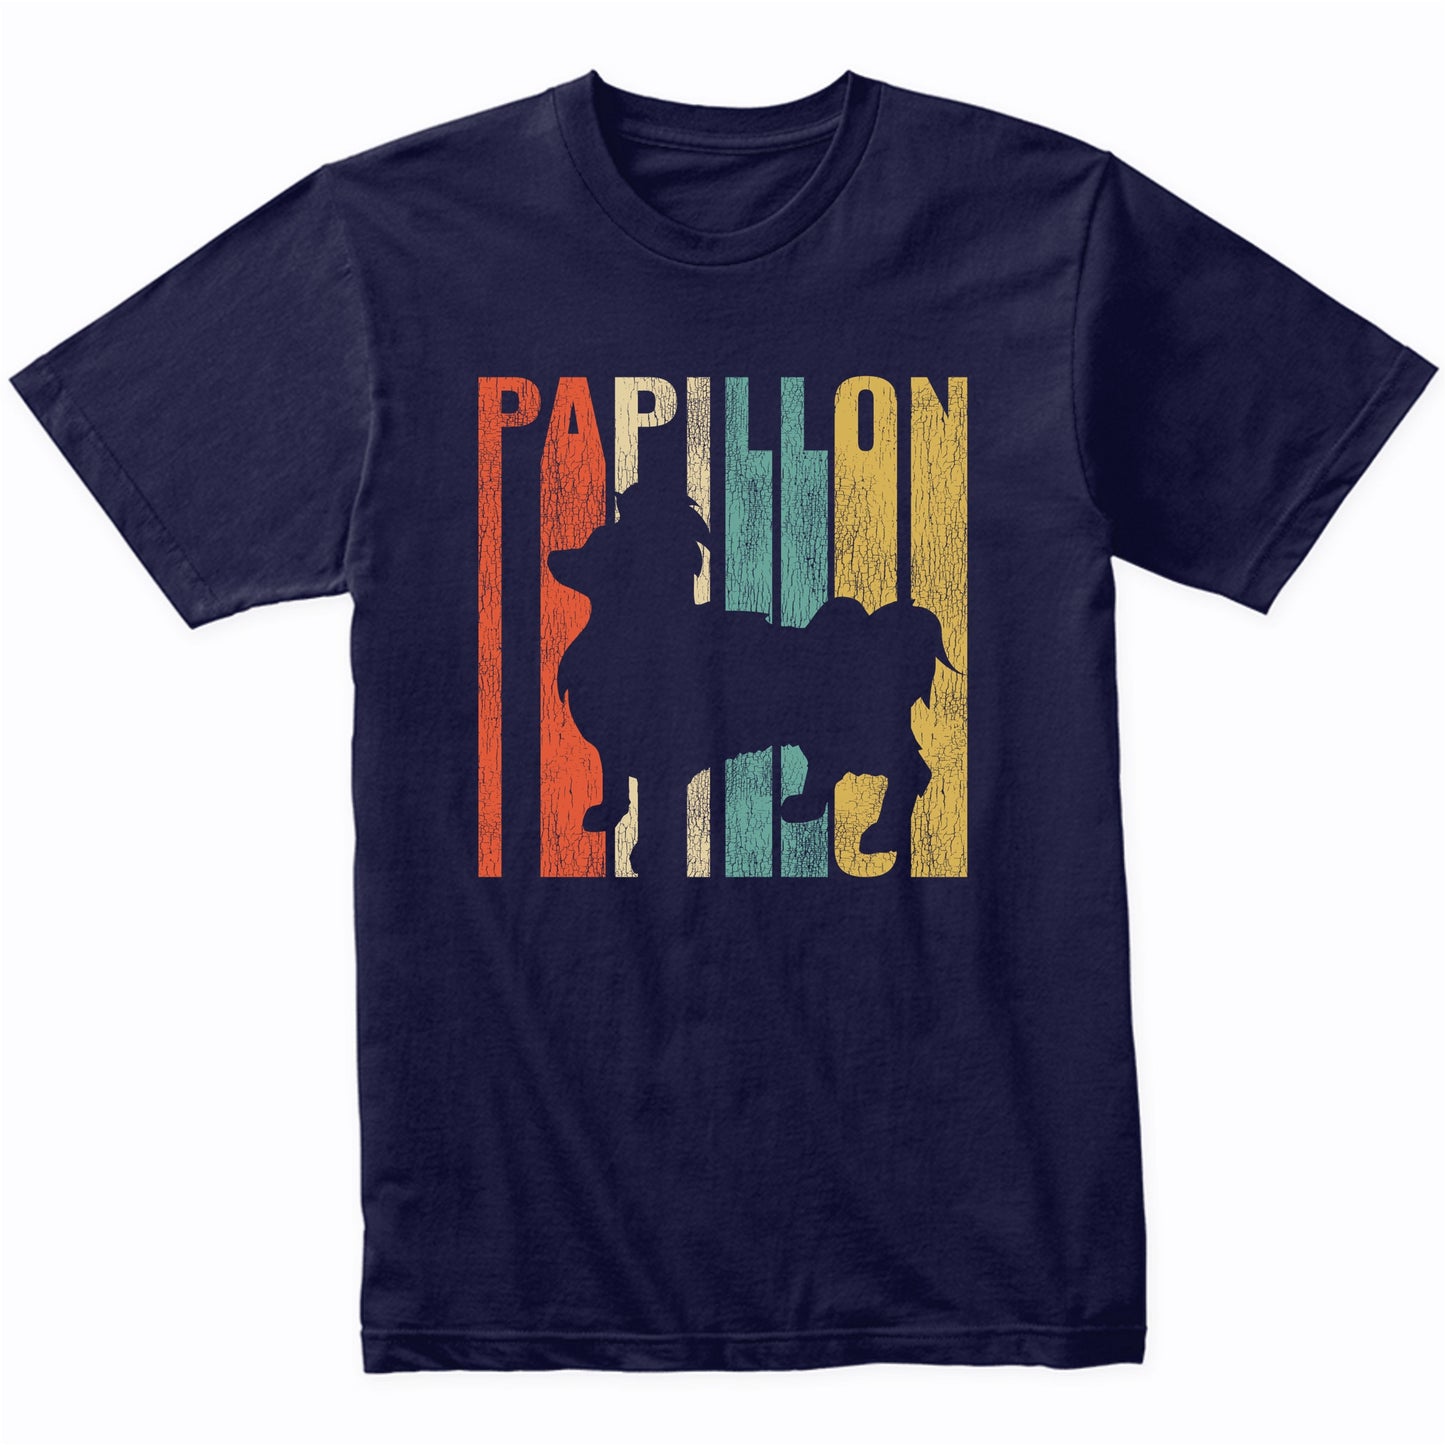 Retro 1970's Style Papillon Dog Silhouette Cracked Distressed T-Shirt